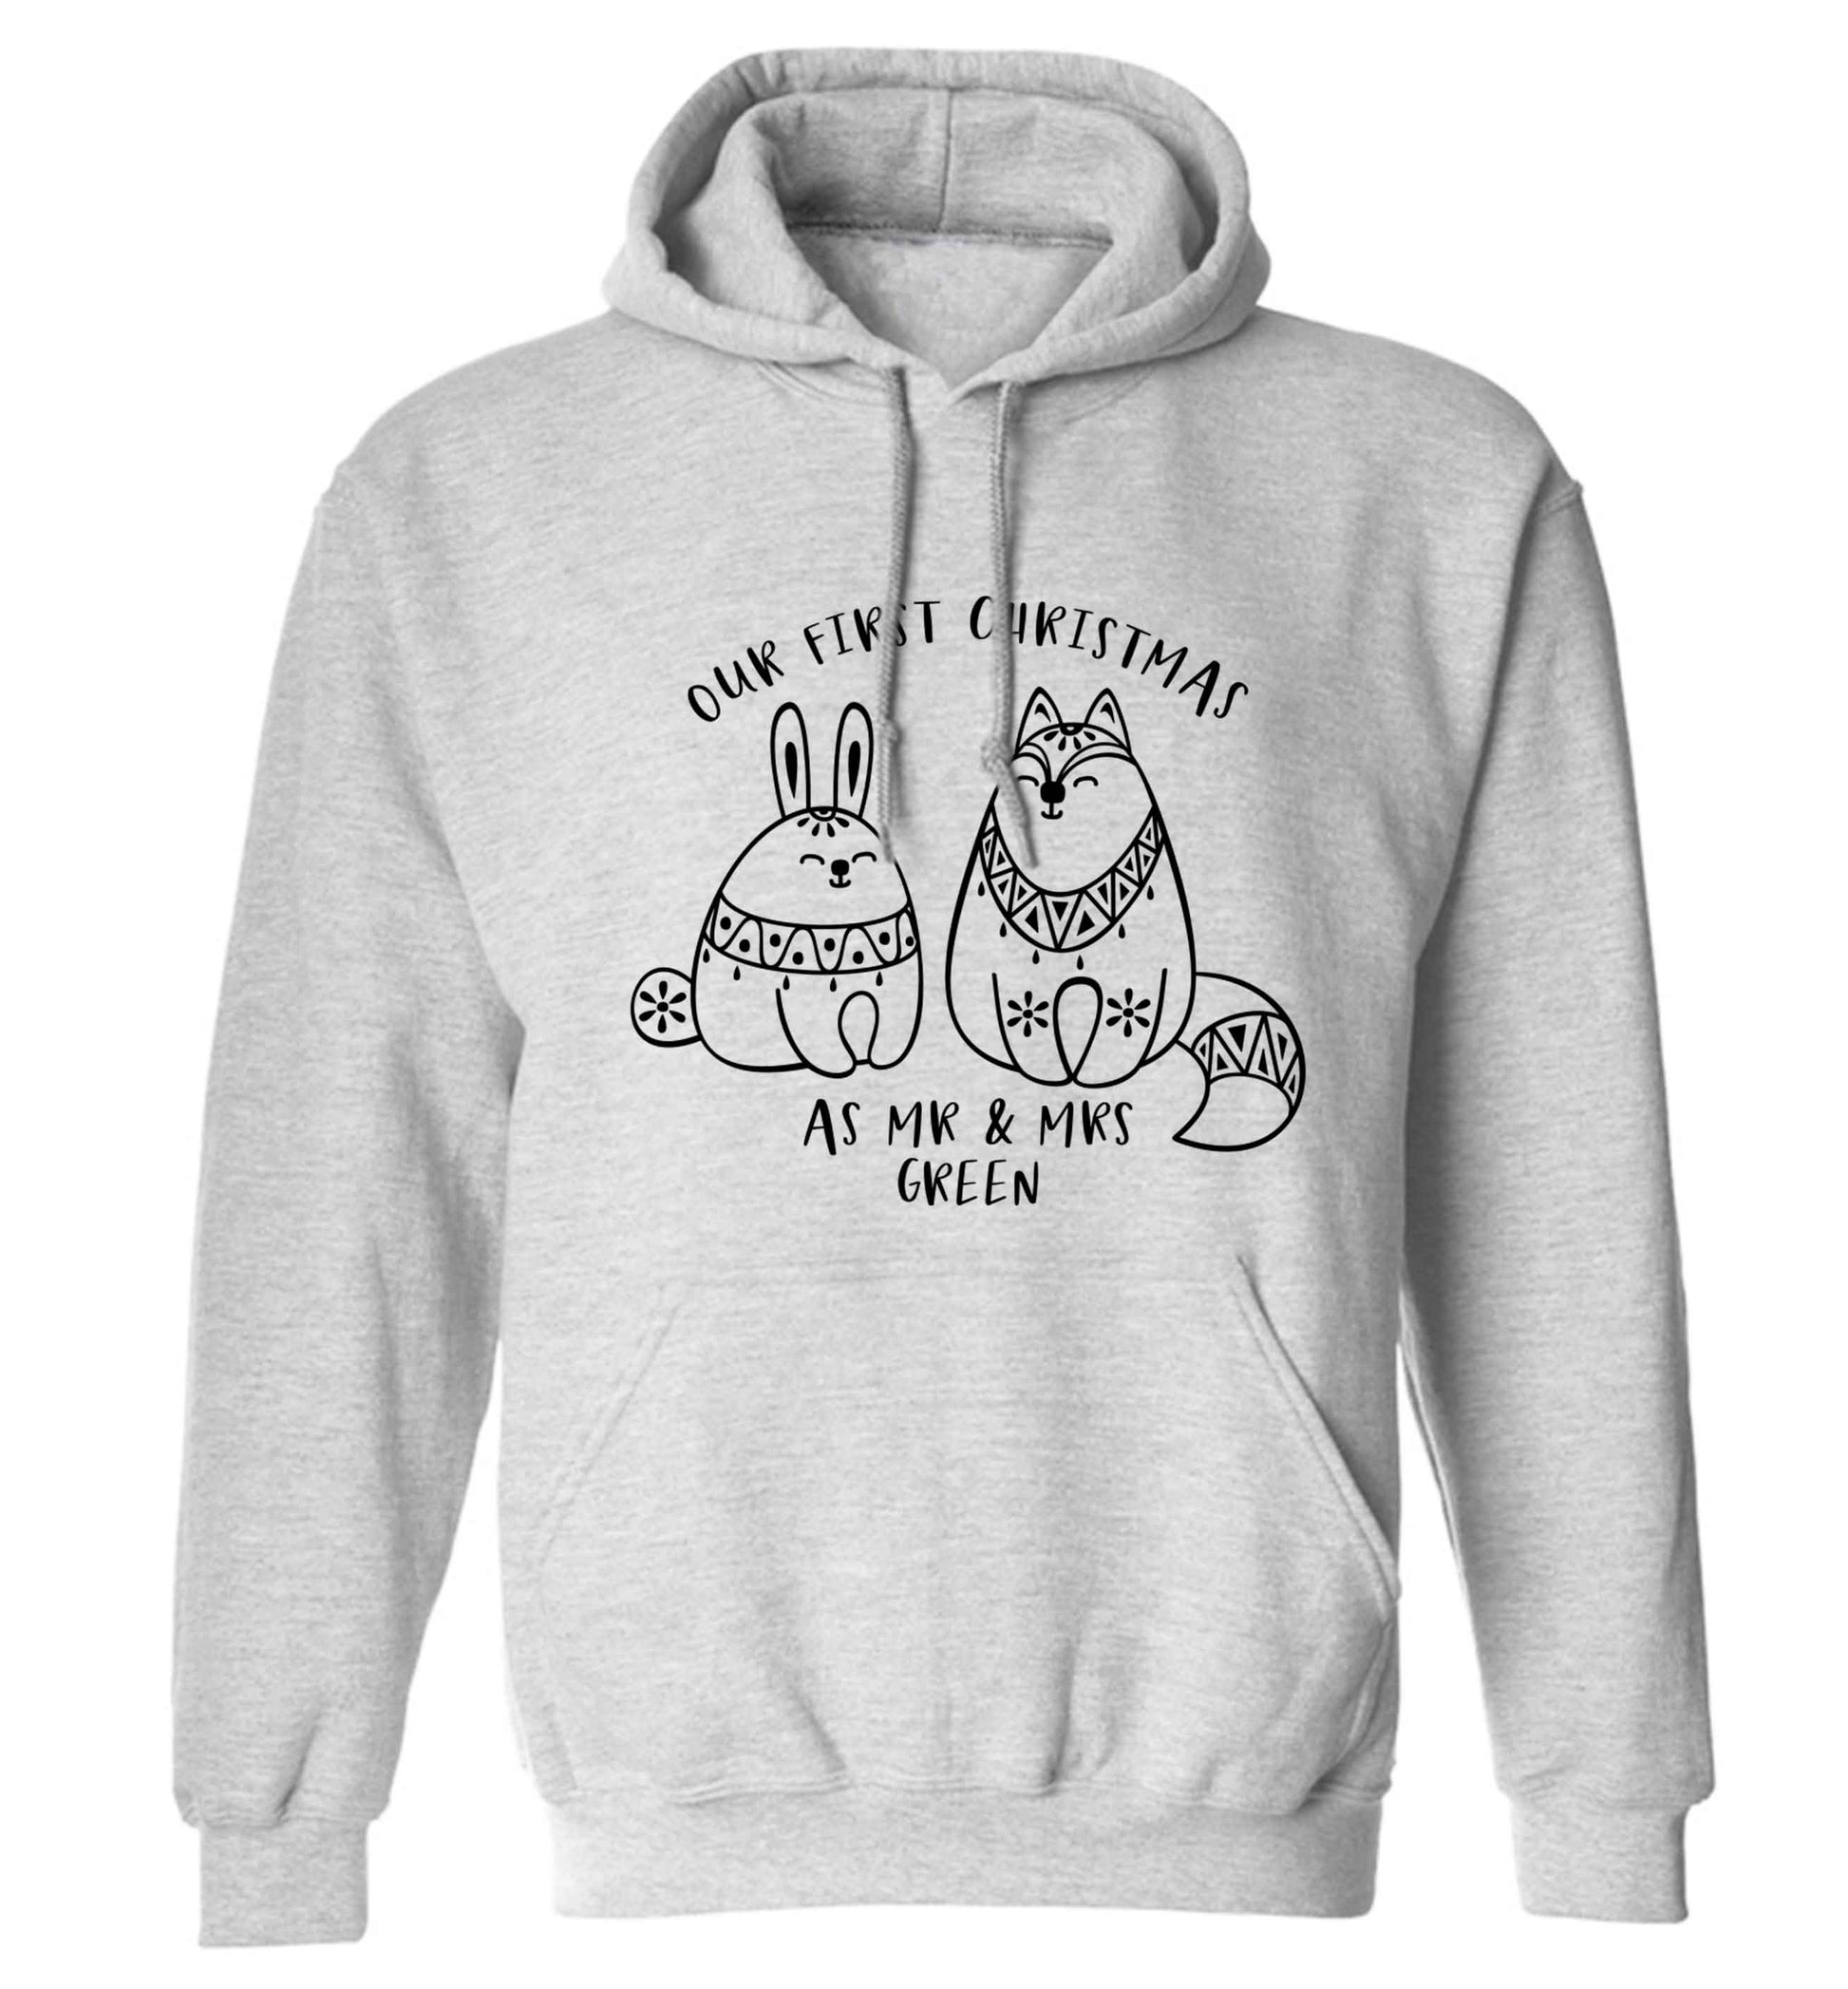 Our first Christmas as Mr & Mrs personalised adults unisex grey hoodie 2XL